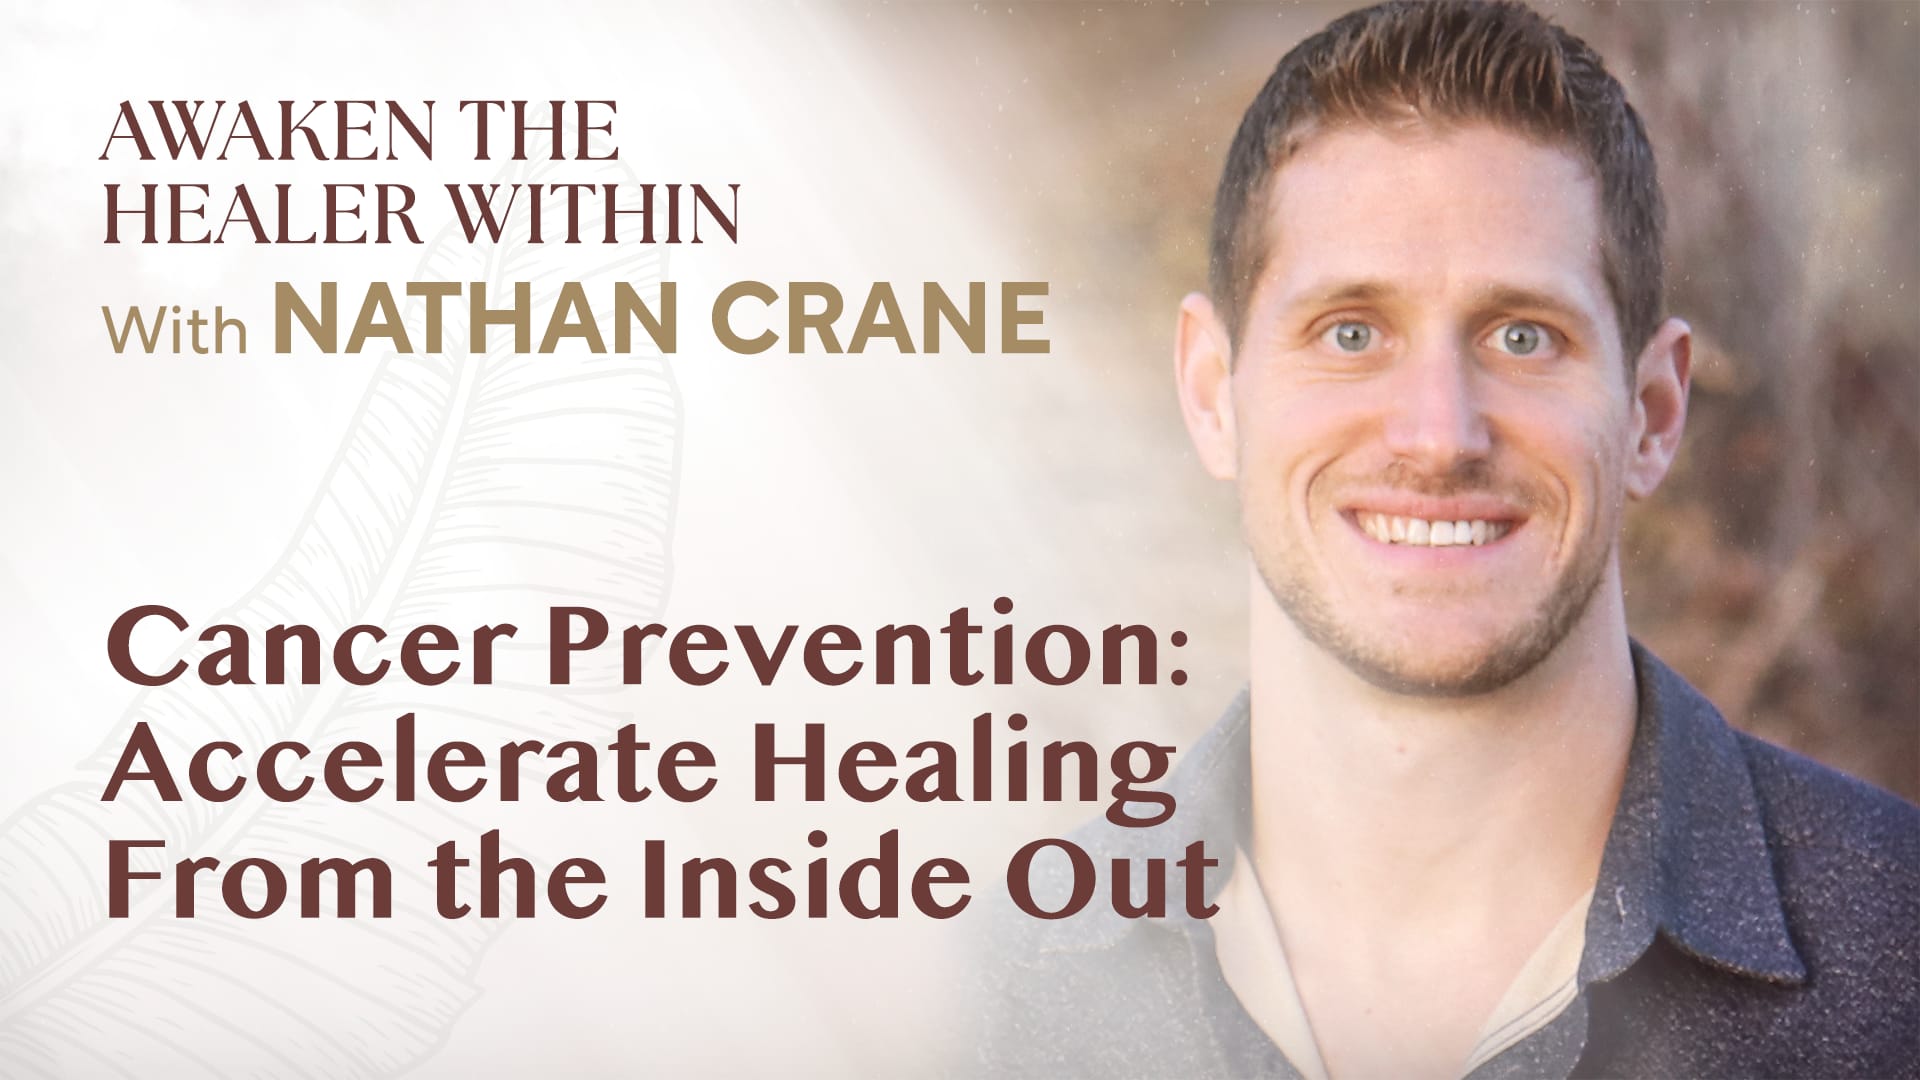 Cancer Prevention: Accelerate Healing From the Inside Out